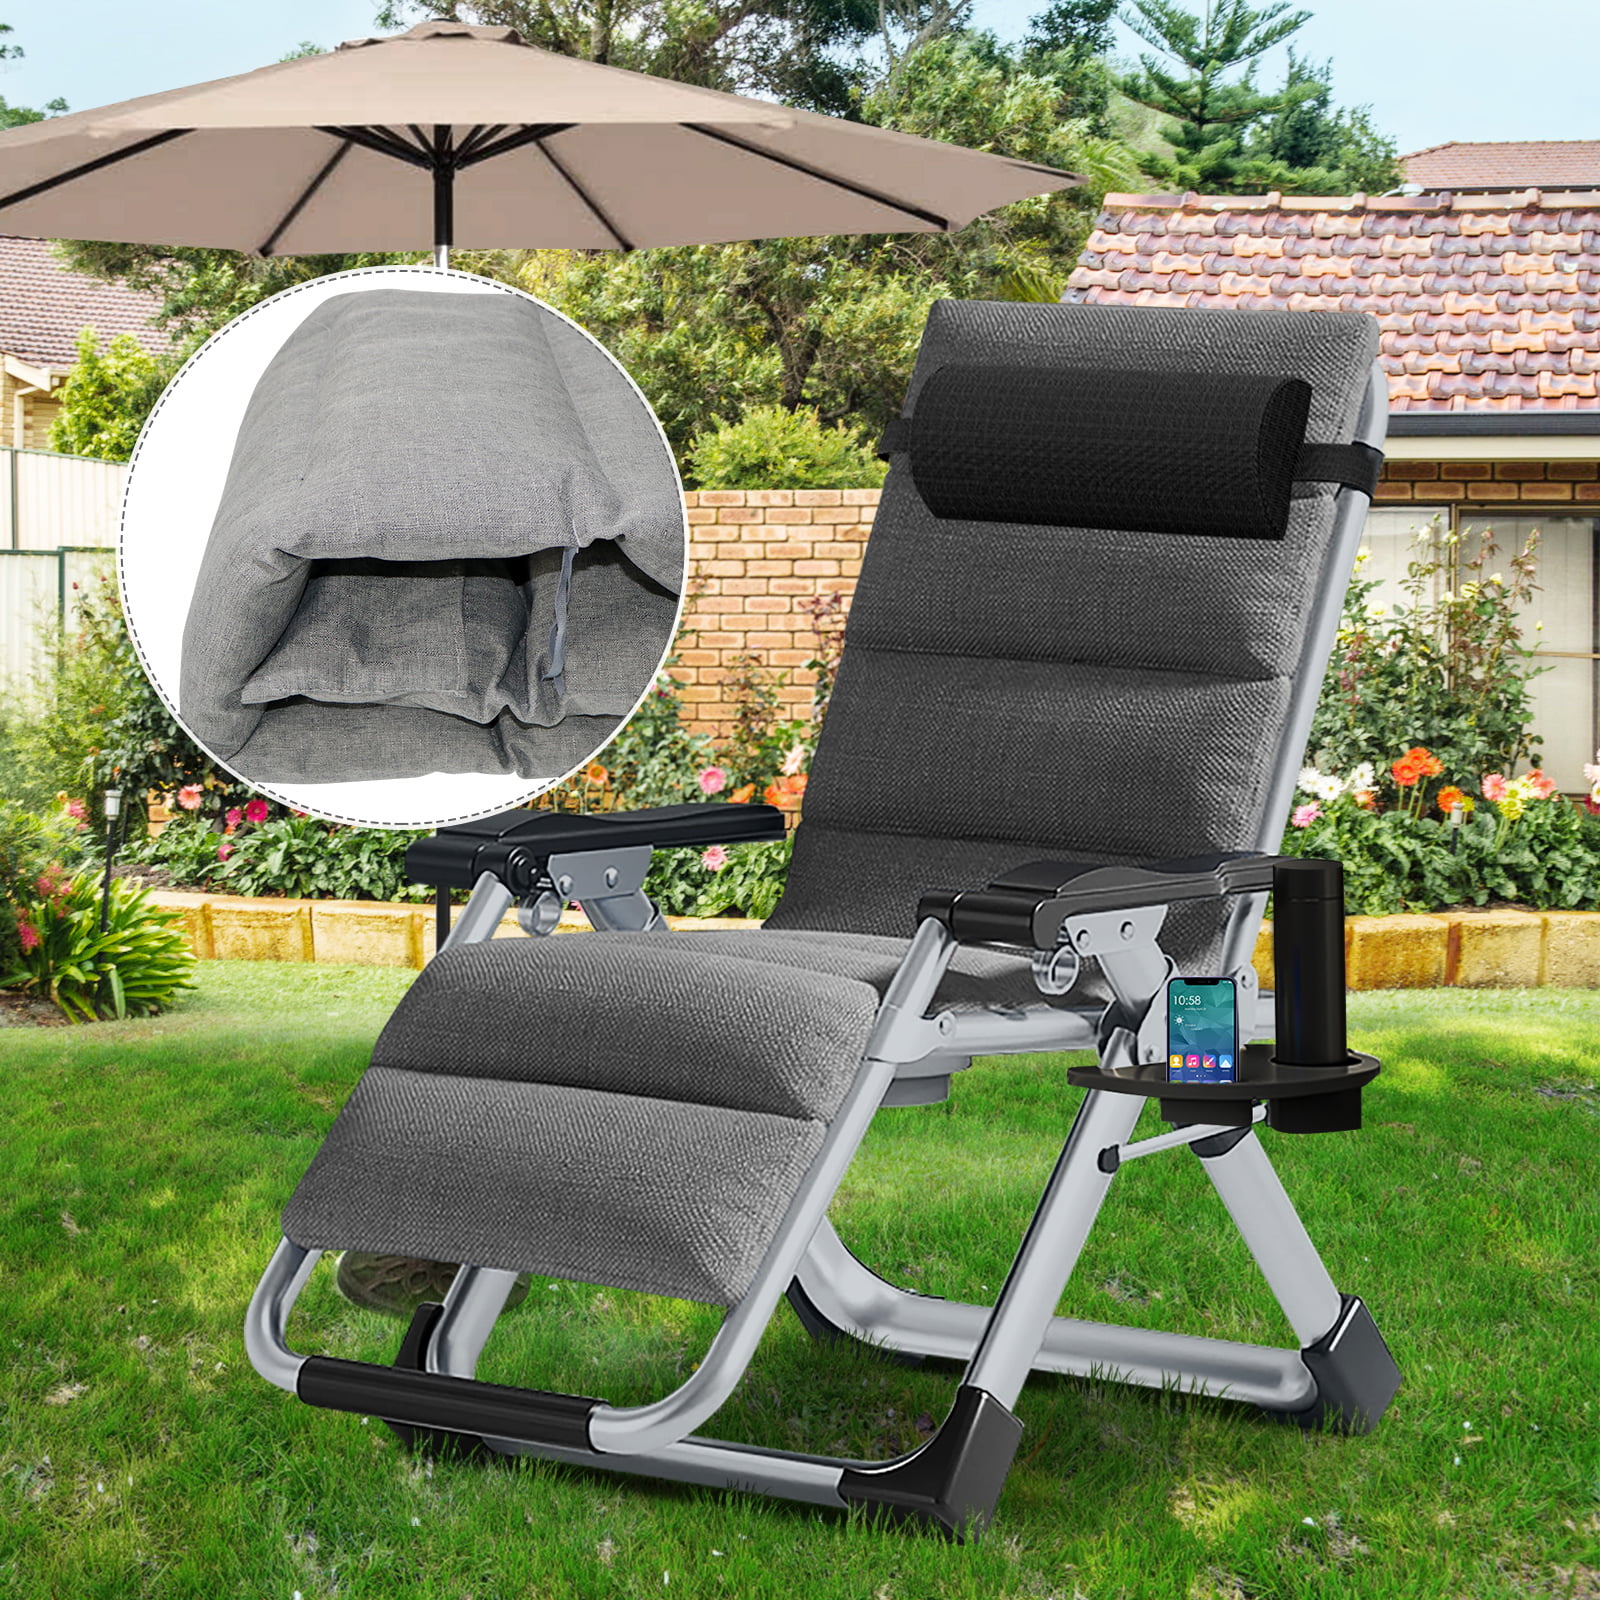 Zero gravity chair indoor outdoor folding lounge shade canopy Recliner camping 